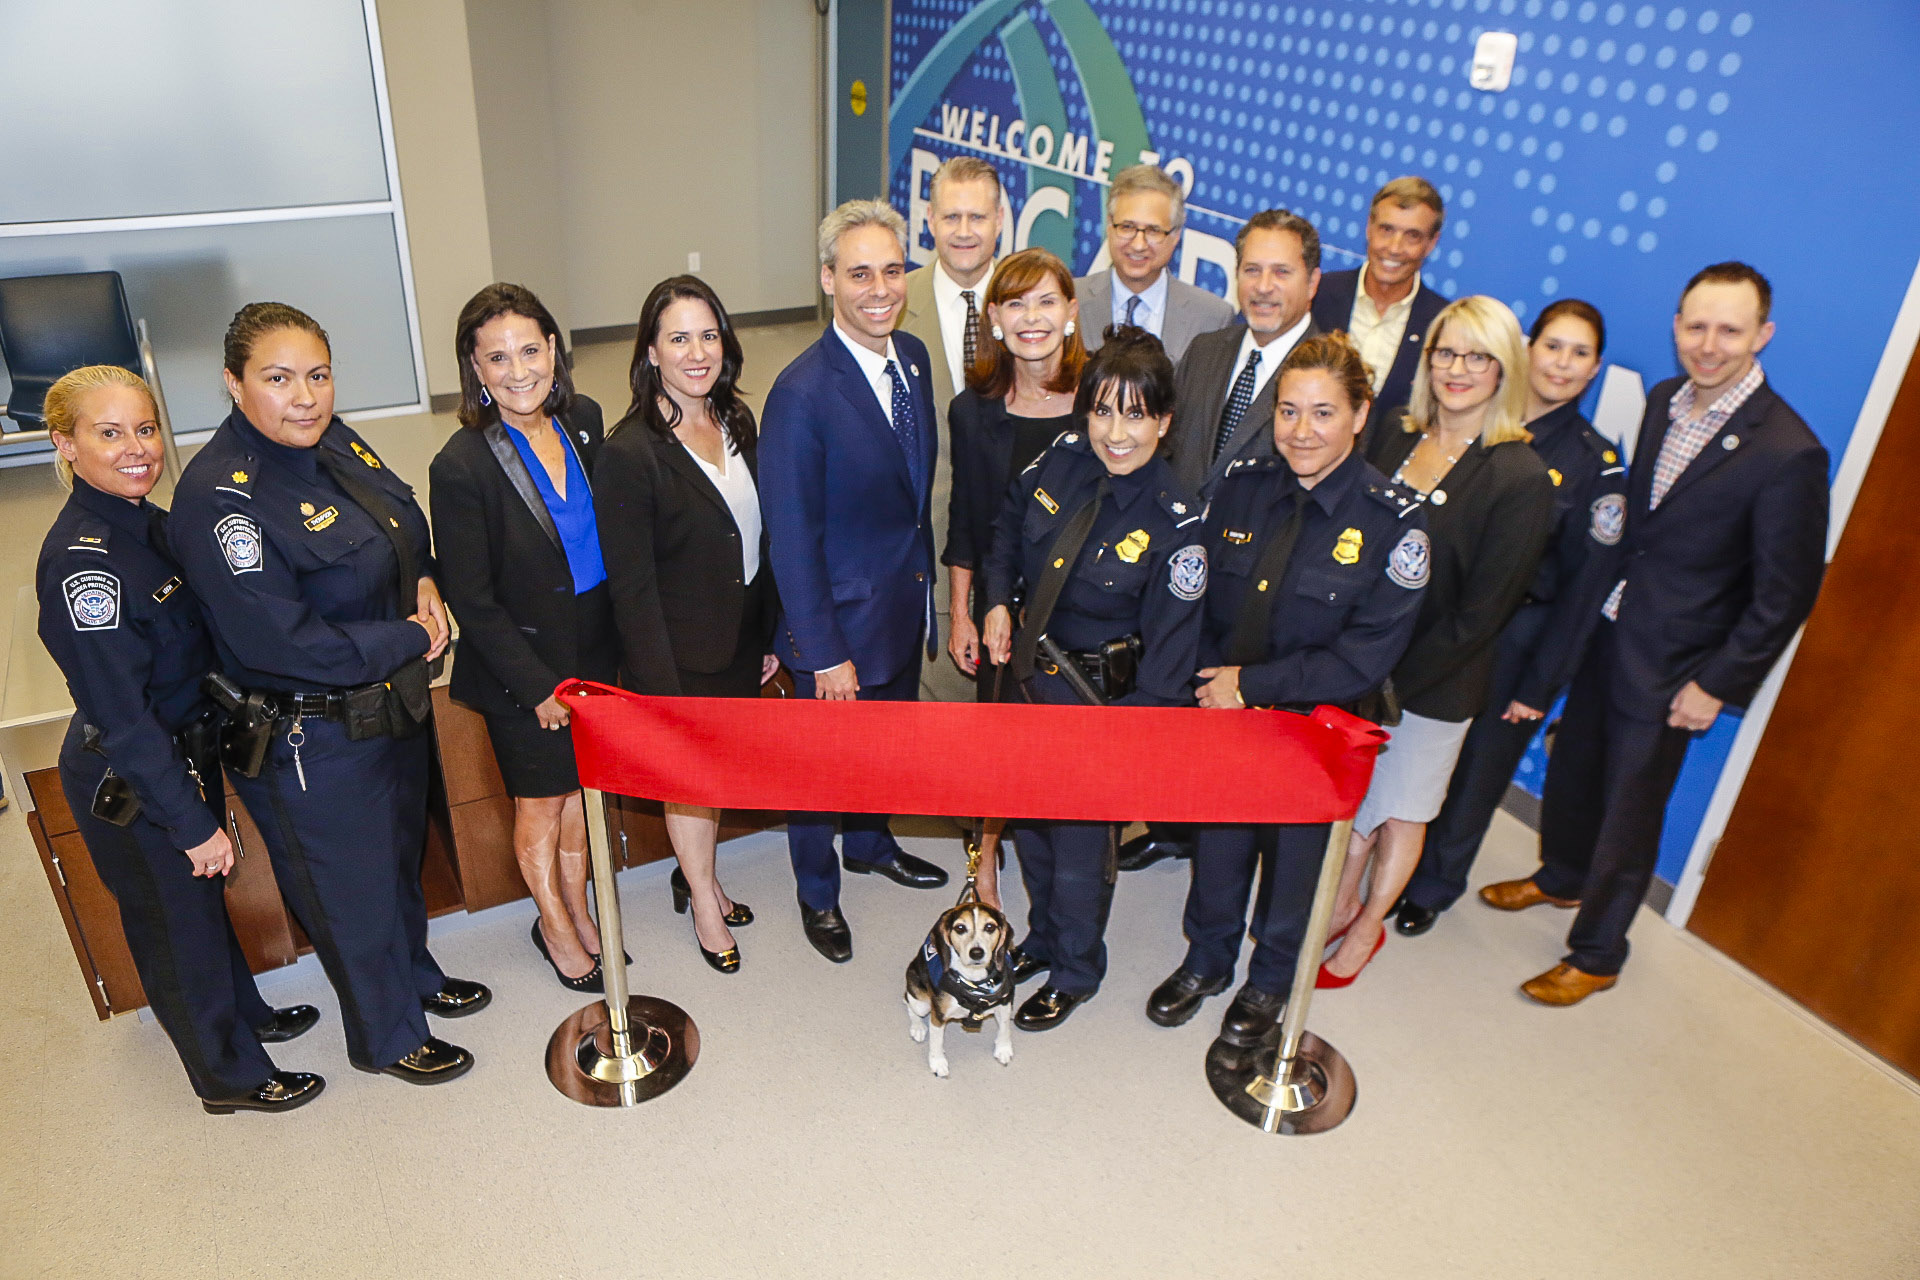 Ribbon cutting at grand opening ceremonies at BRAA U.S Customs & Border Protection Service office